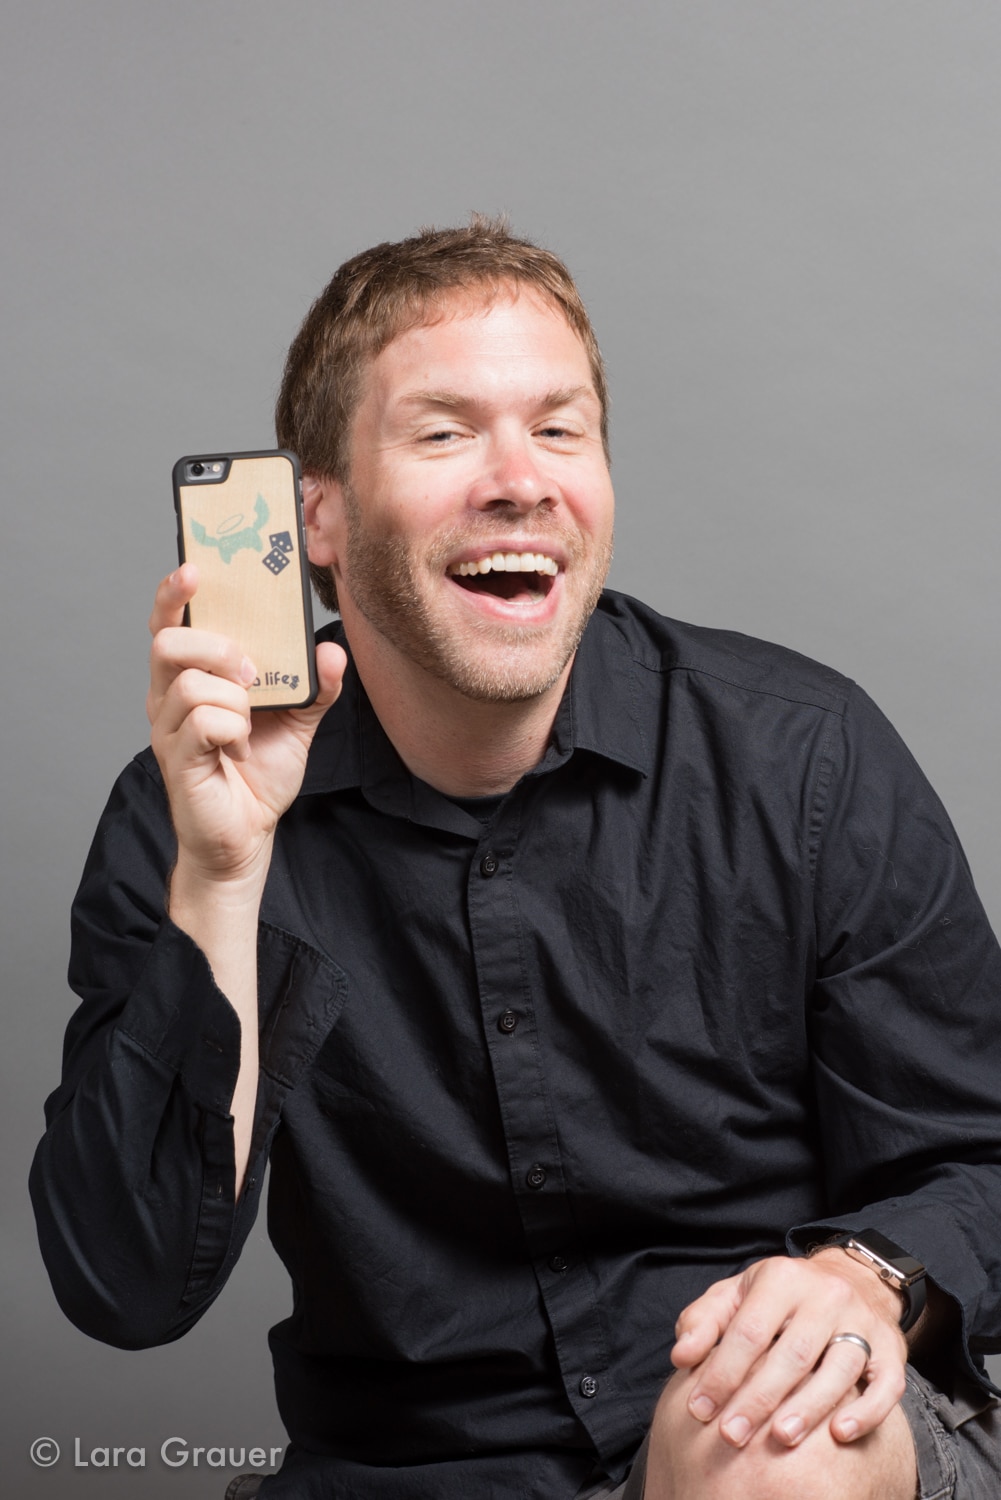 photo of a man in a black button down shirt holding a phone with a happy expression.